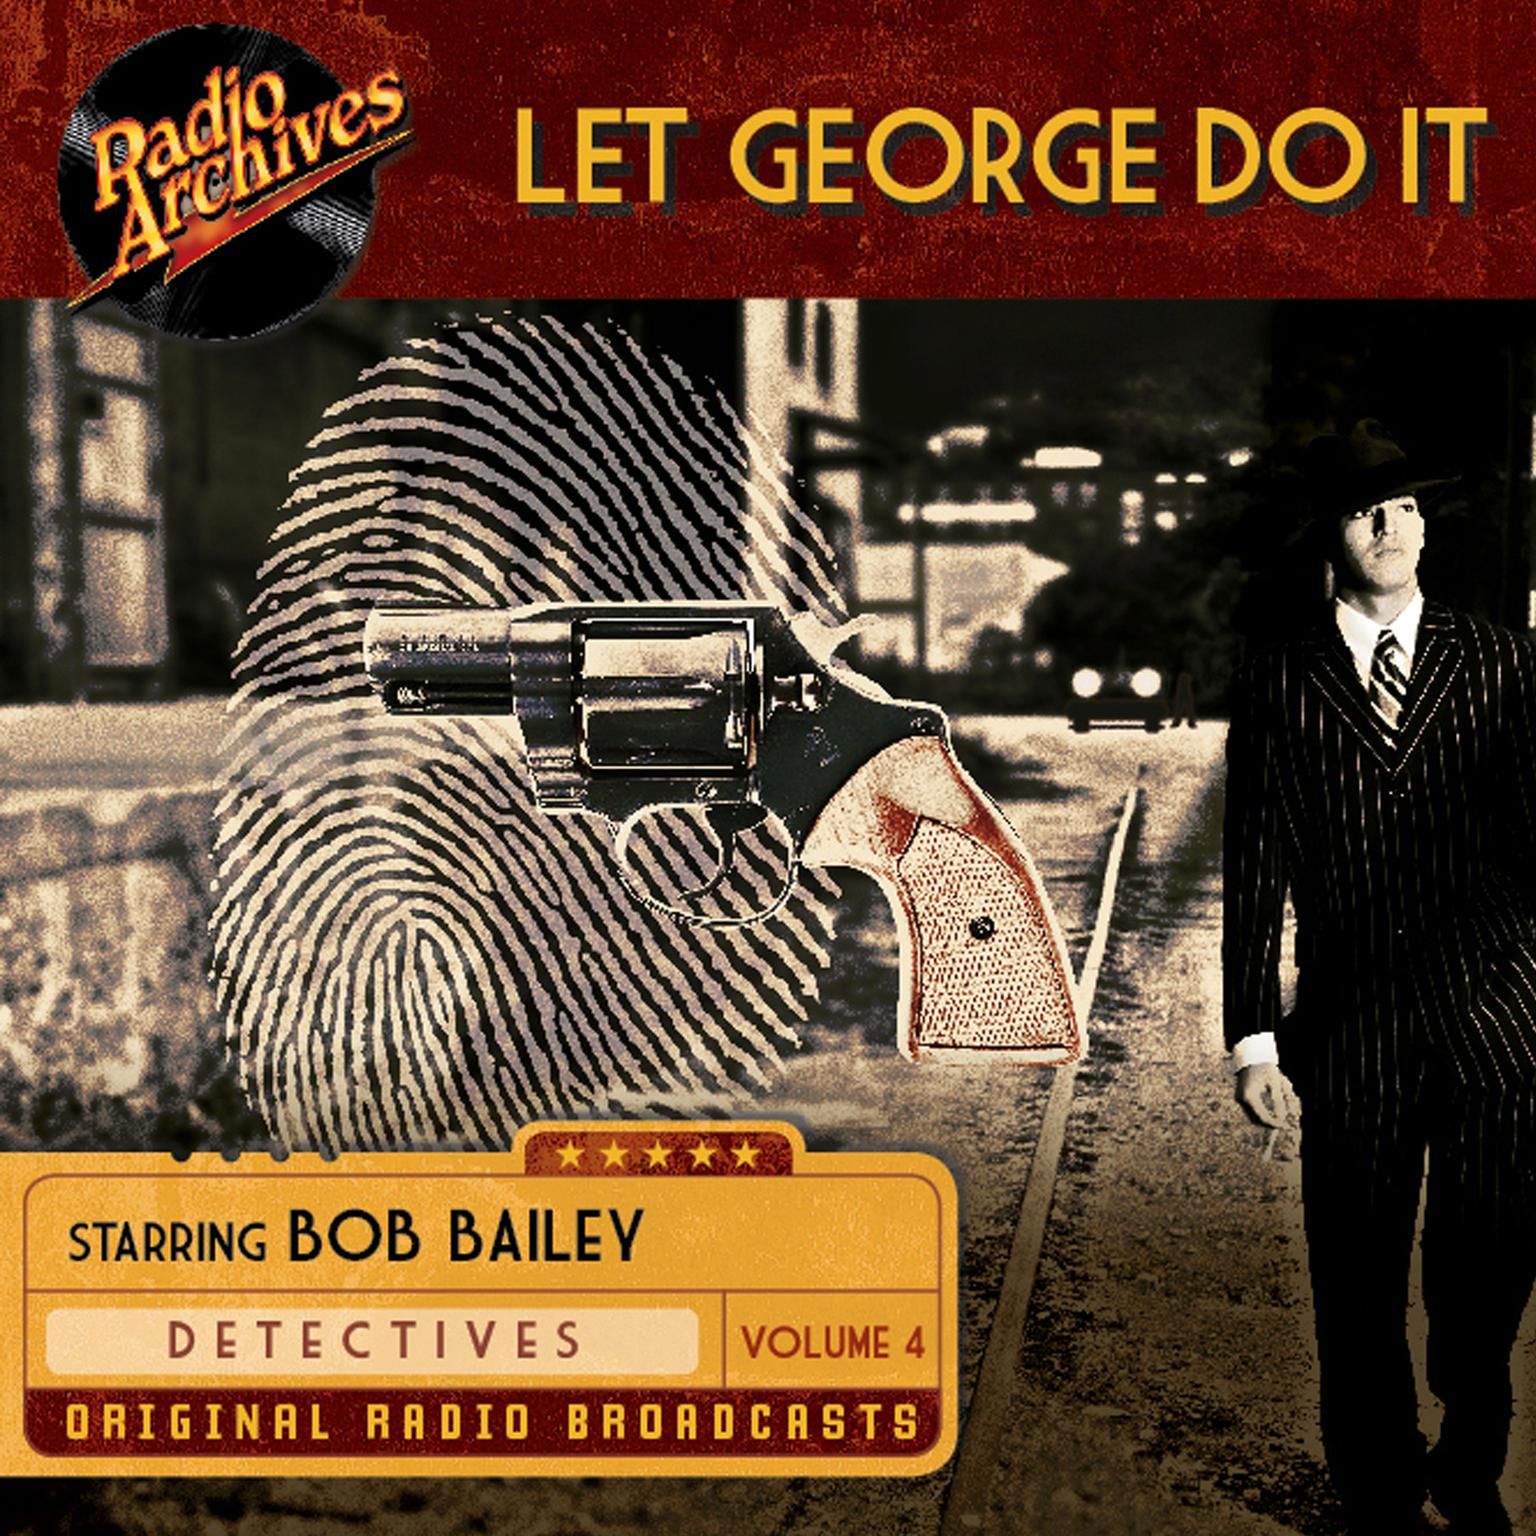 Let George Do It, Volume 4 Audiobook, by Dreamscape Media